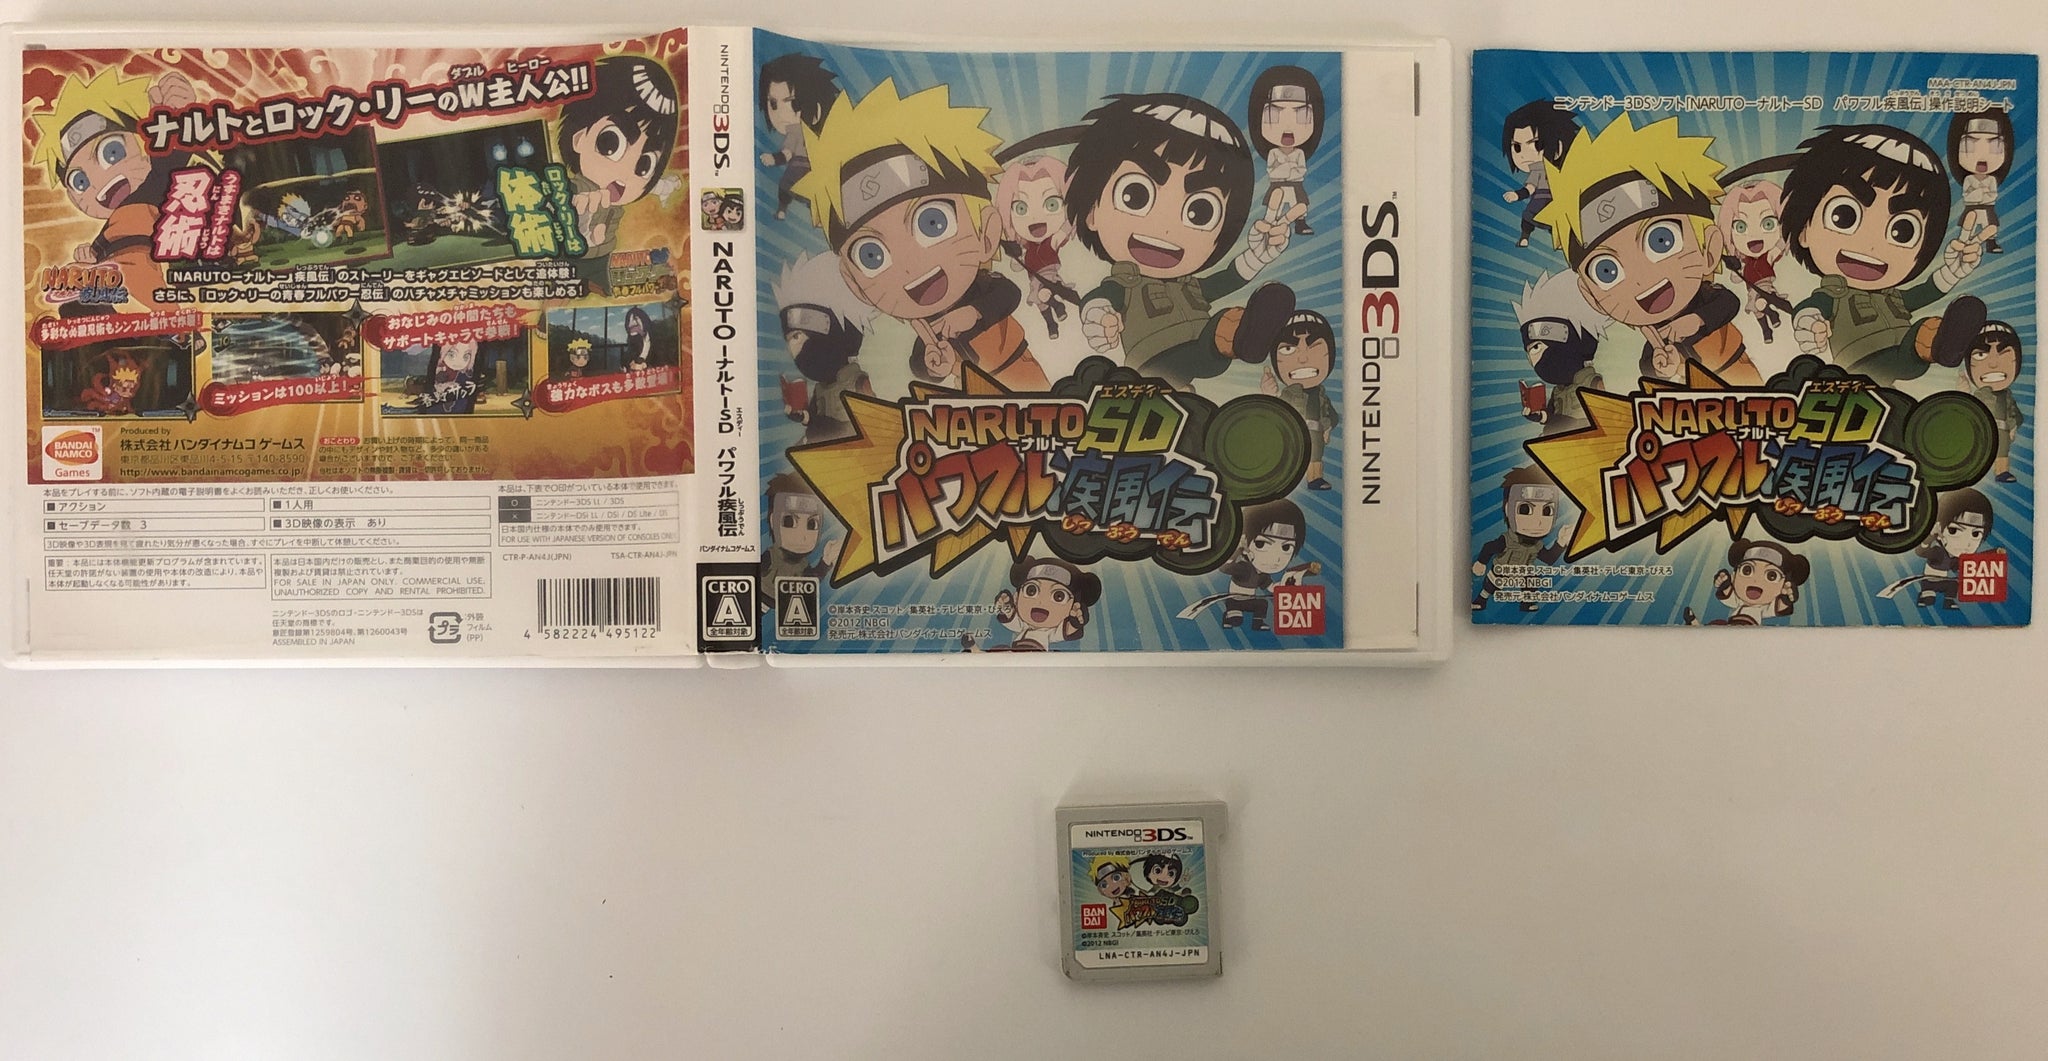 Nintendo 2DS 3DS JP Game:  "Naruto SD Powerful Shippuden" USED